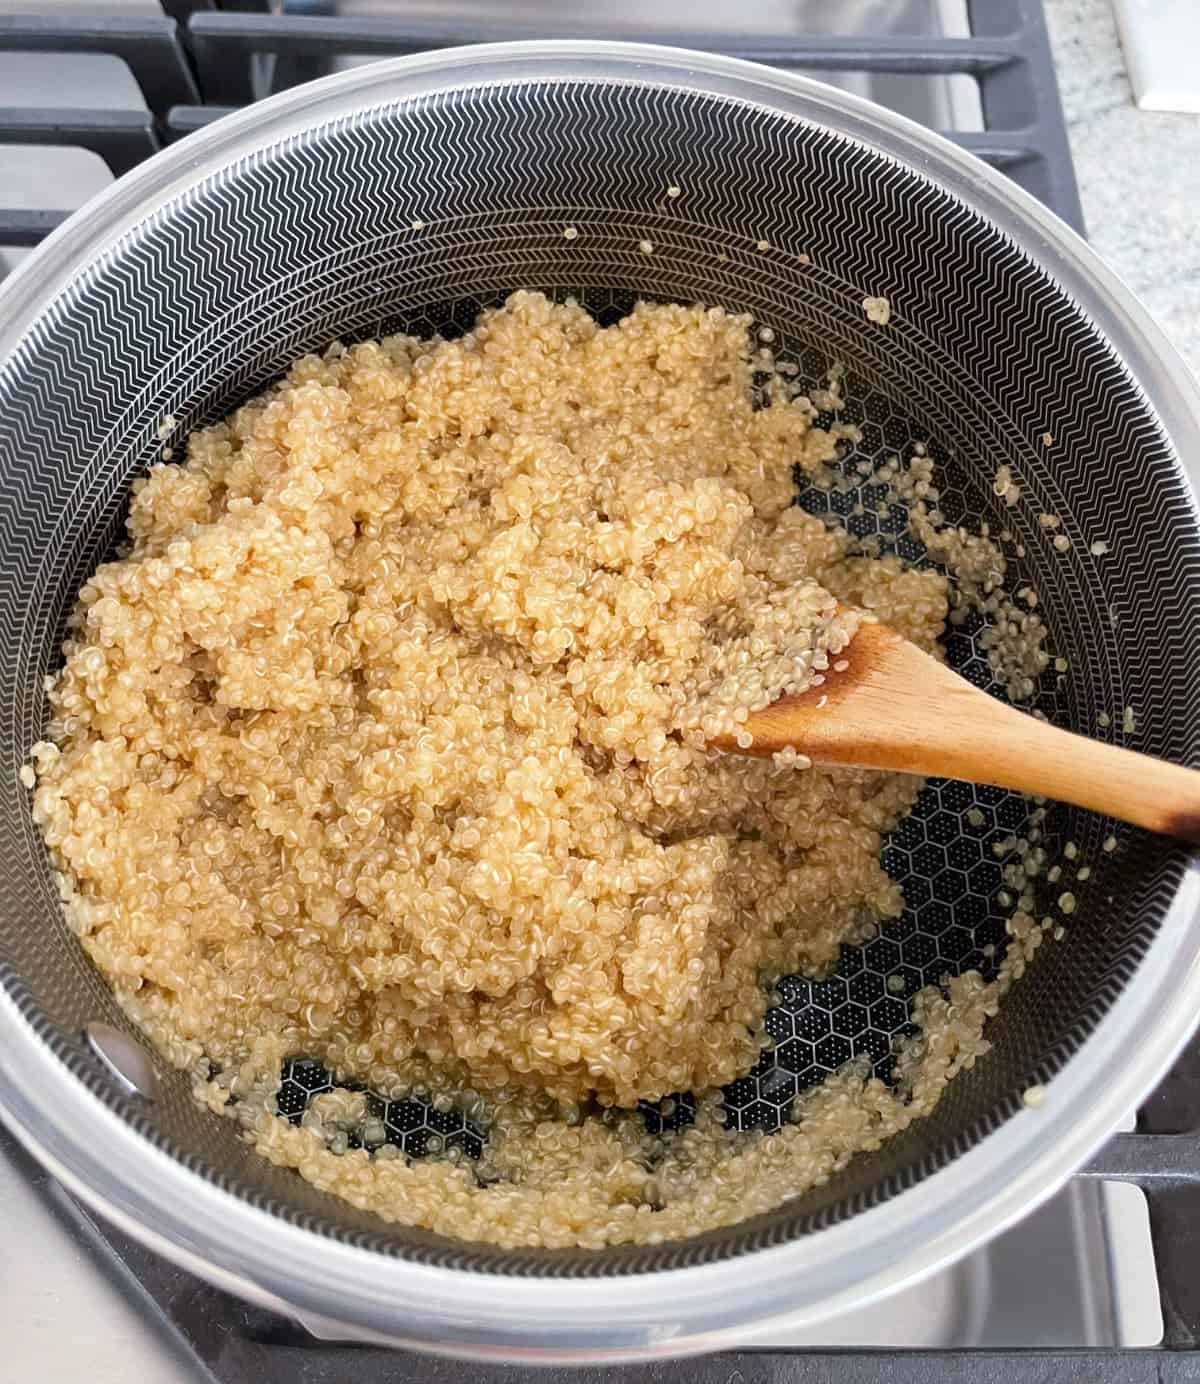 Stirring cooked quinoa in saucepan with wooden spoon.